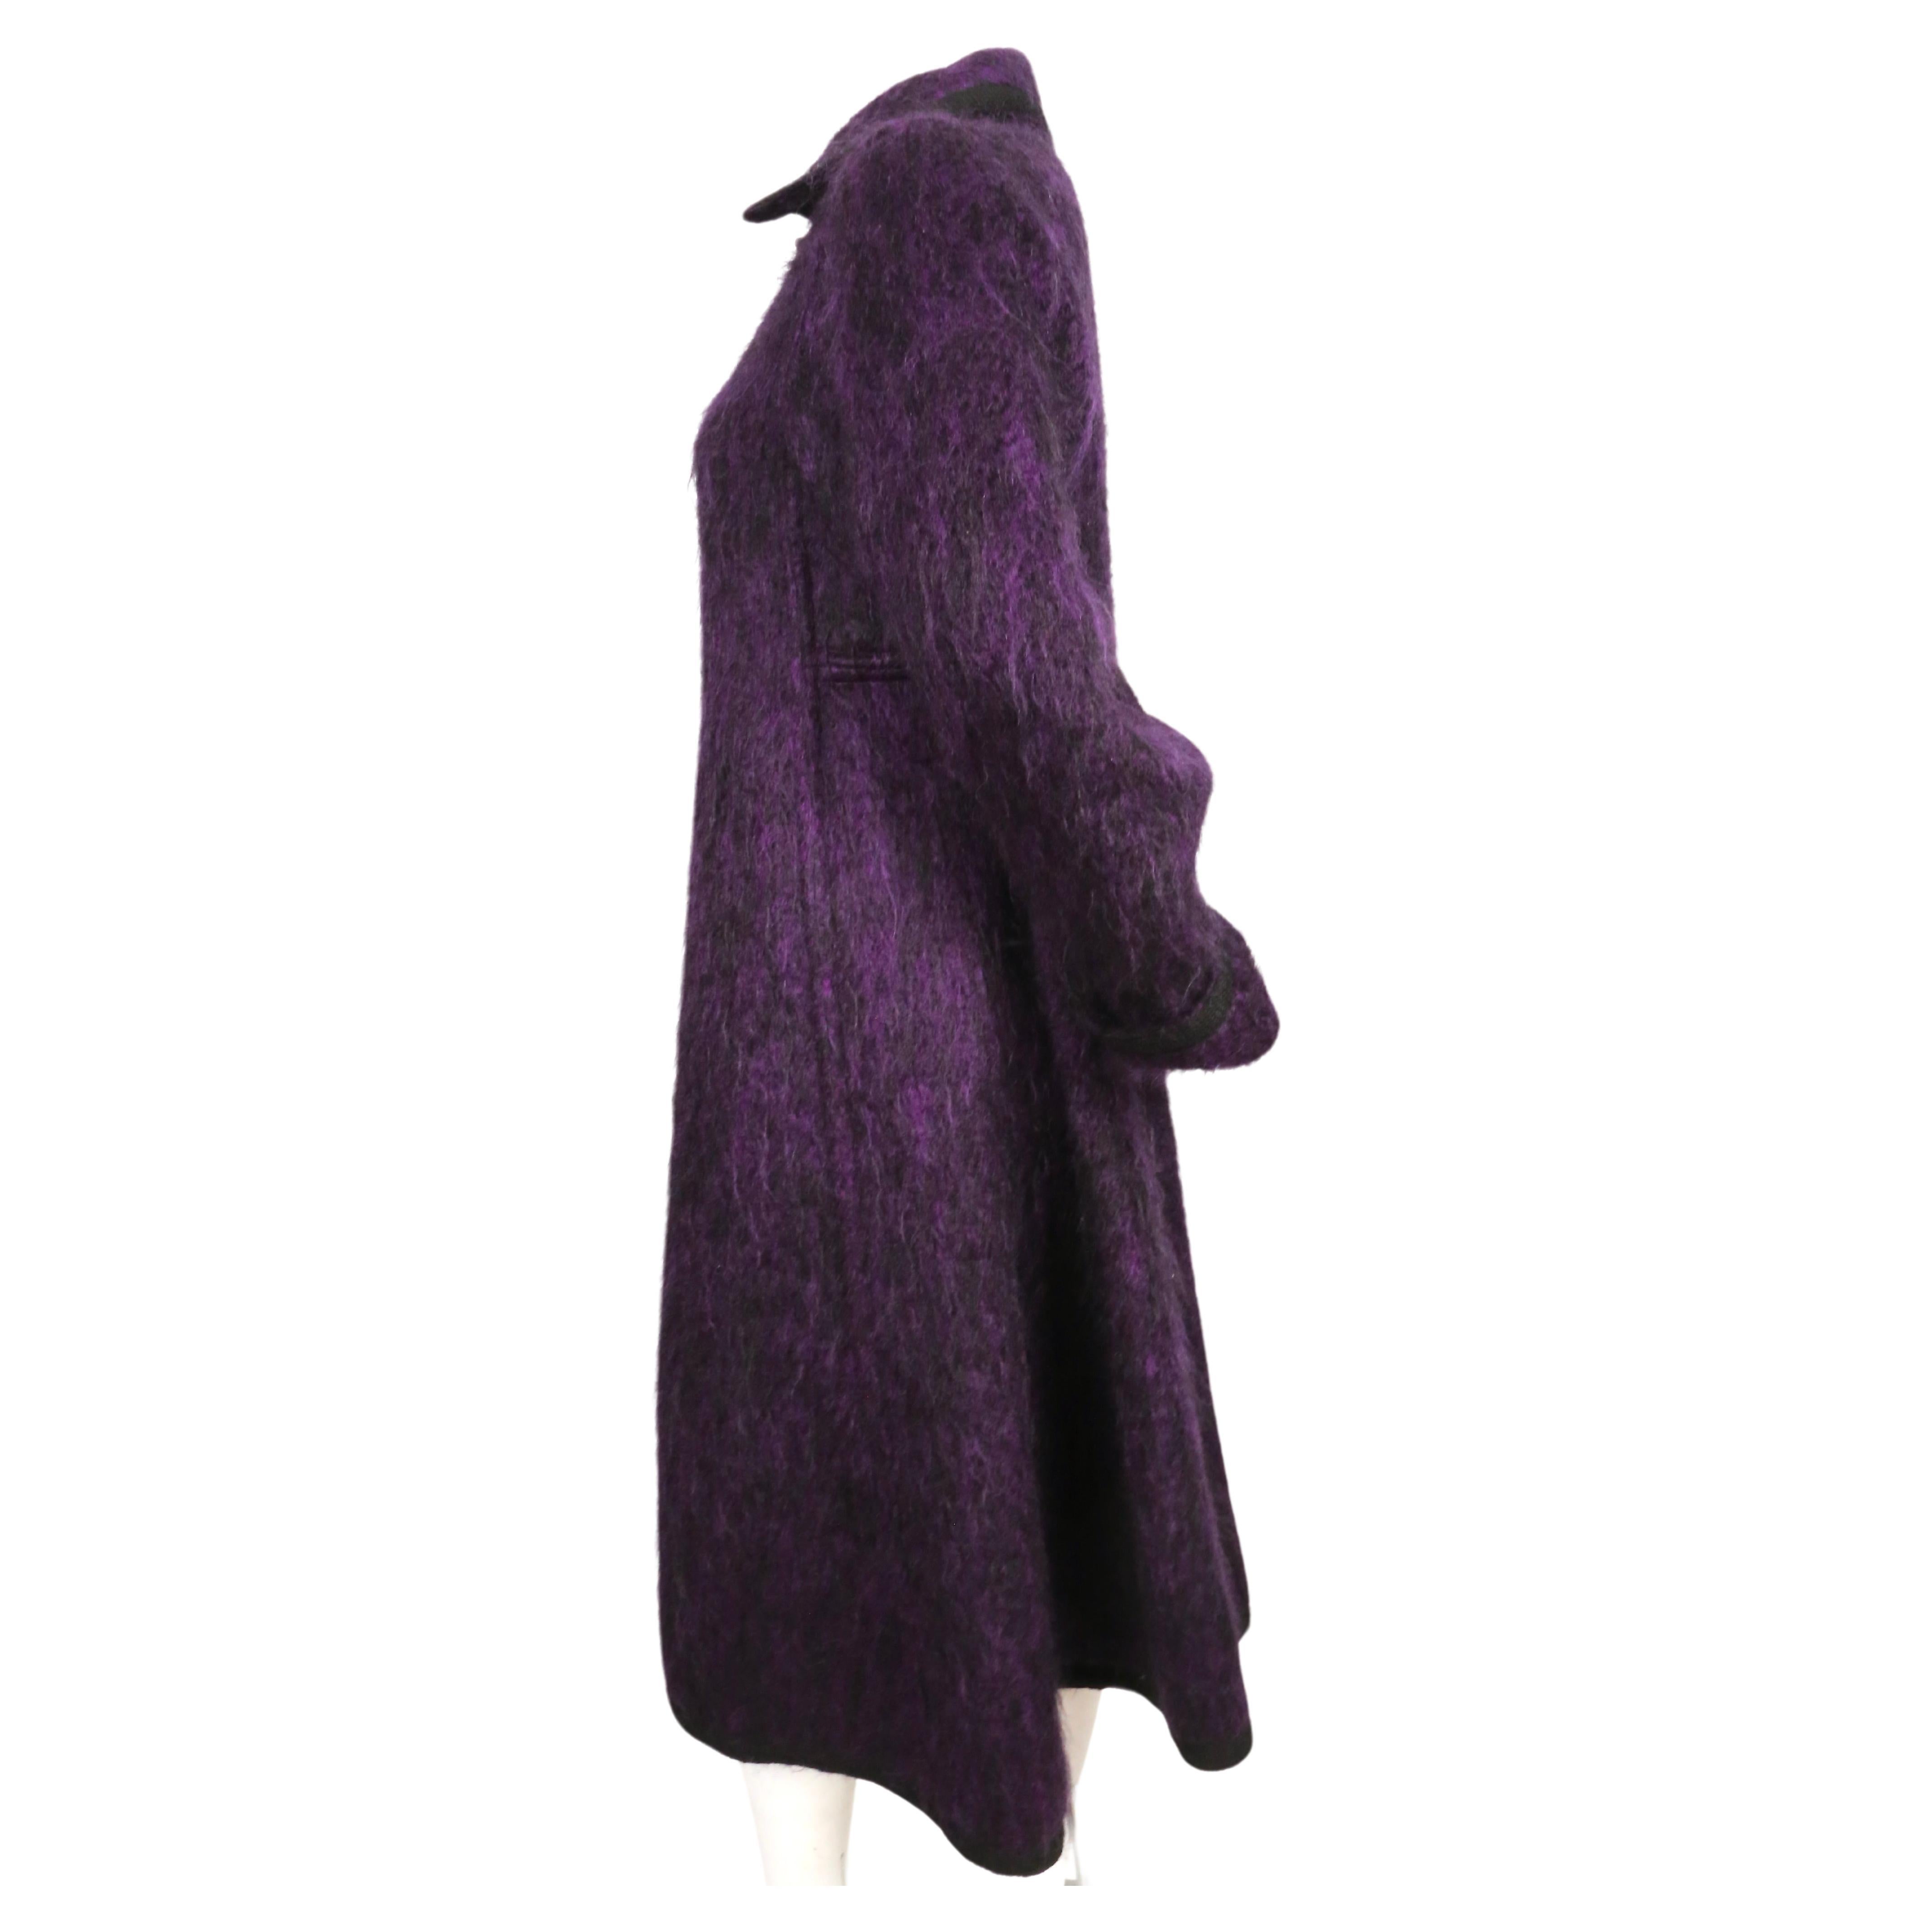 1960's YVES SAINT LAURENT violet purple brushed wool coat with braided trim For Sale 4